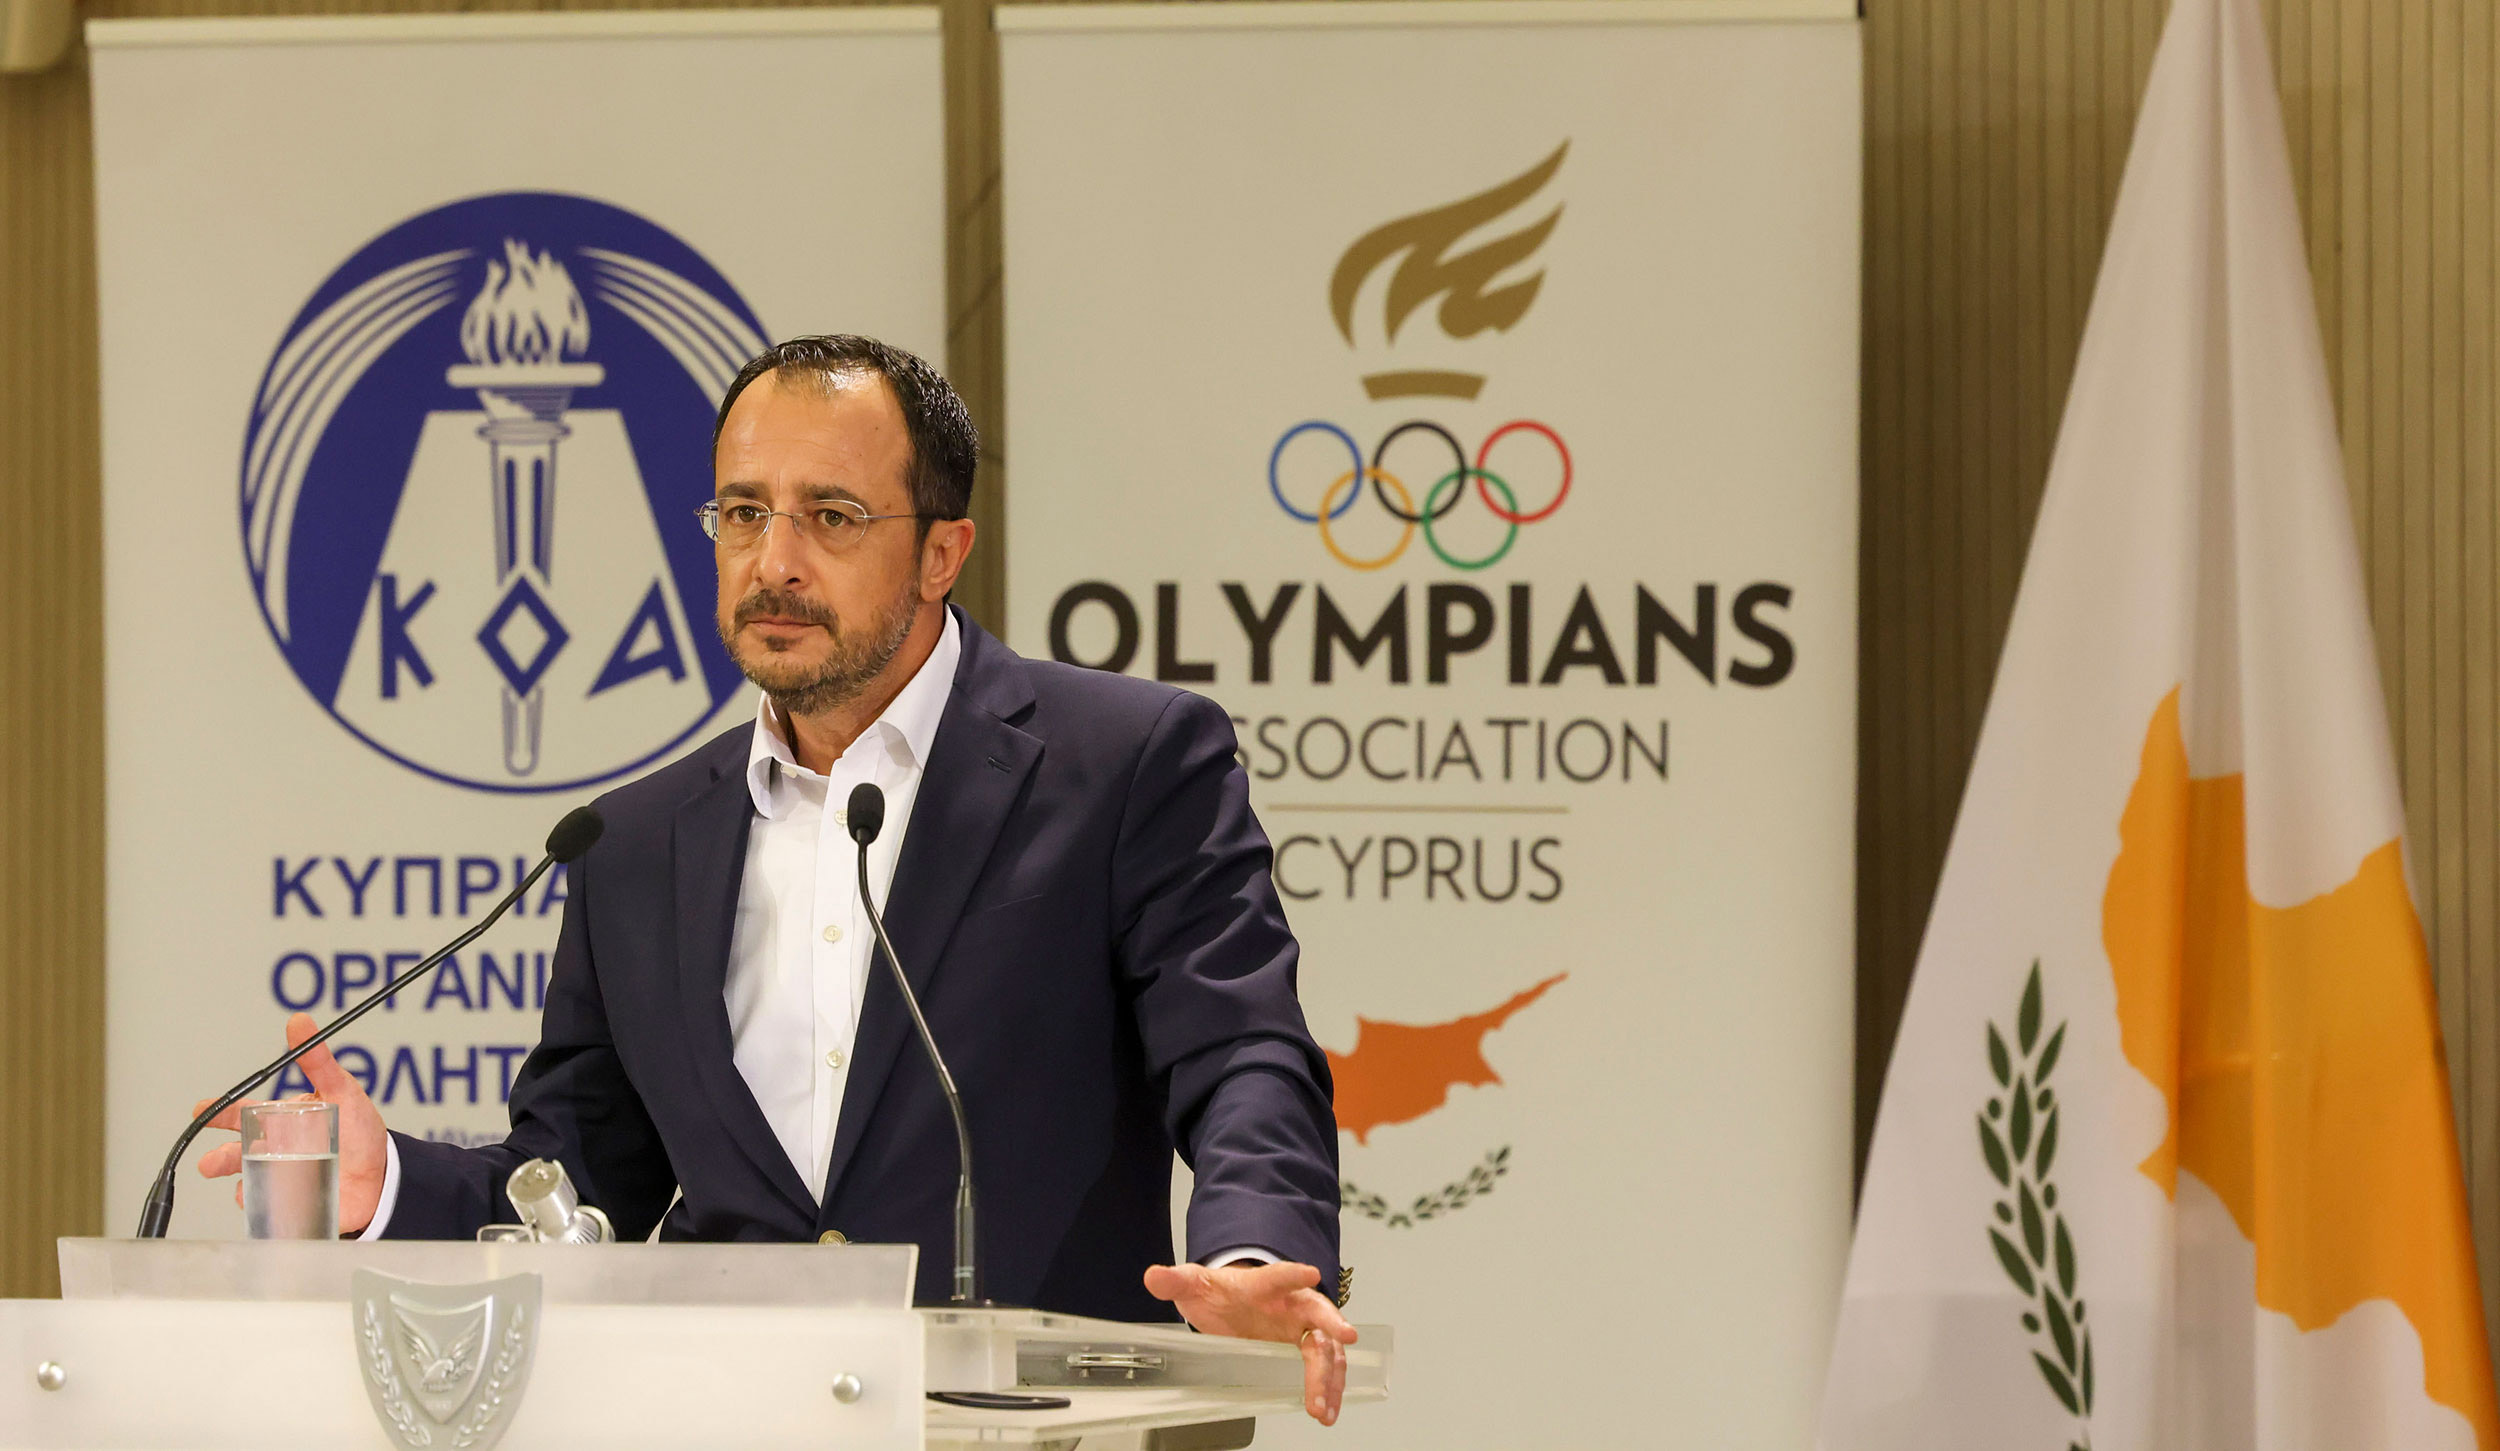 ‘We didn’t do enough for sports’, president admits